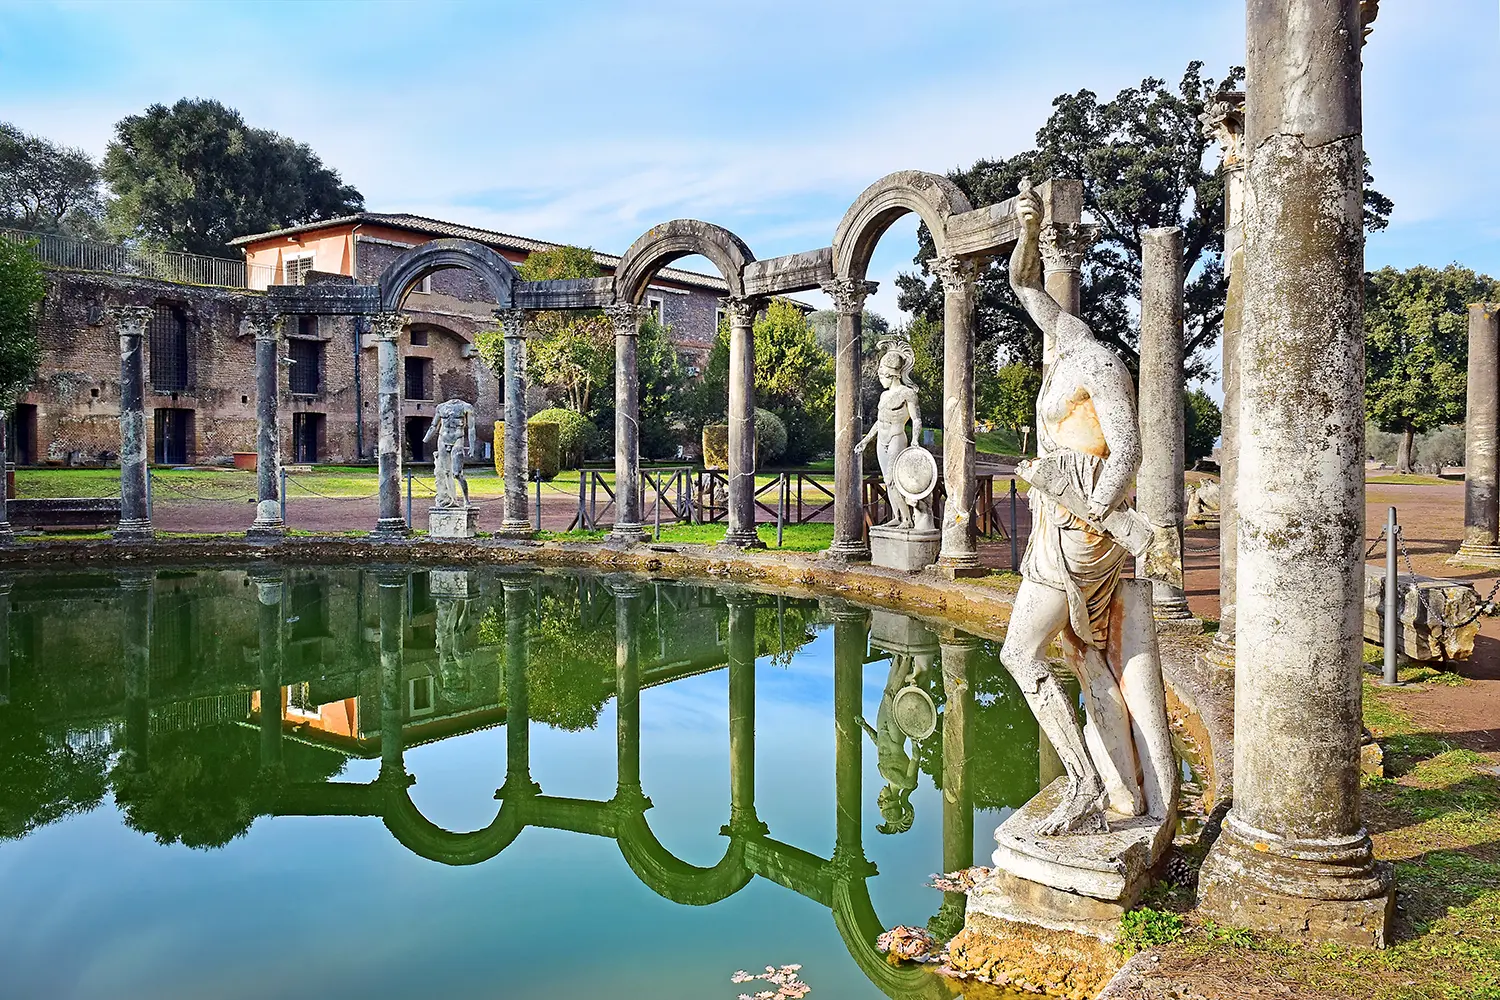 Ancient pool called Canopus, surrounded by greek sculptures in Villa Adriana (Hadrian's Villa) and reflections in water in Tivoli, Italy